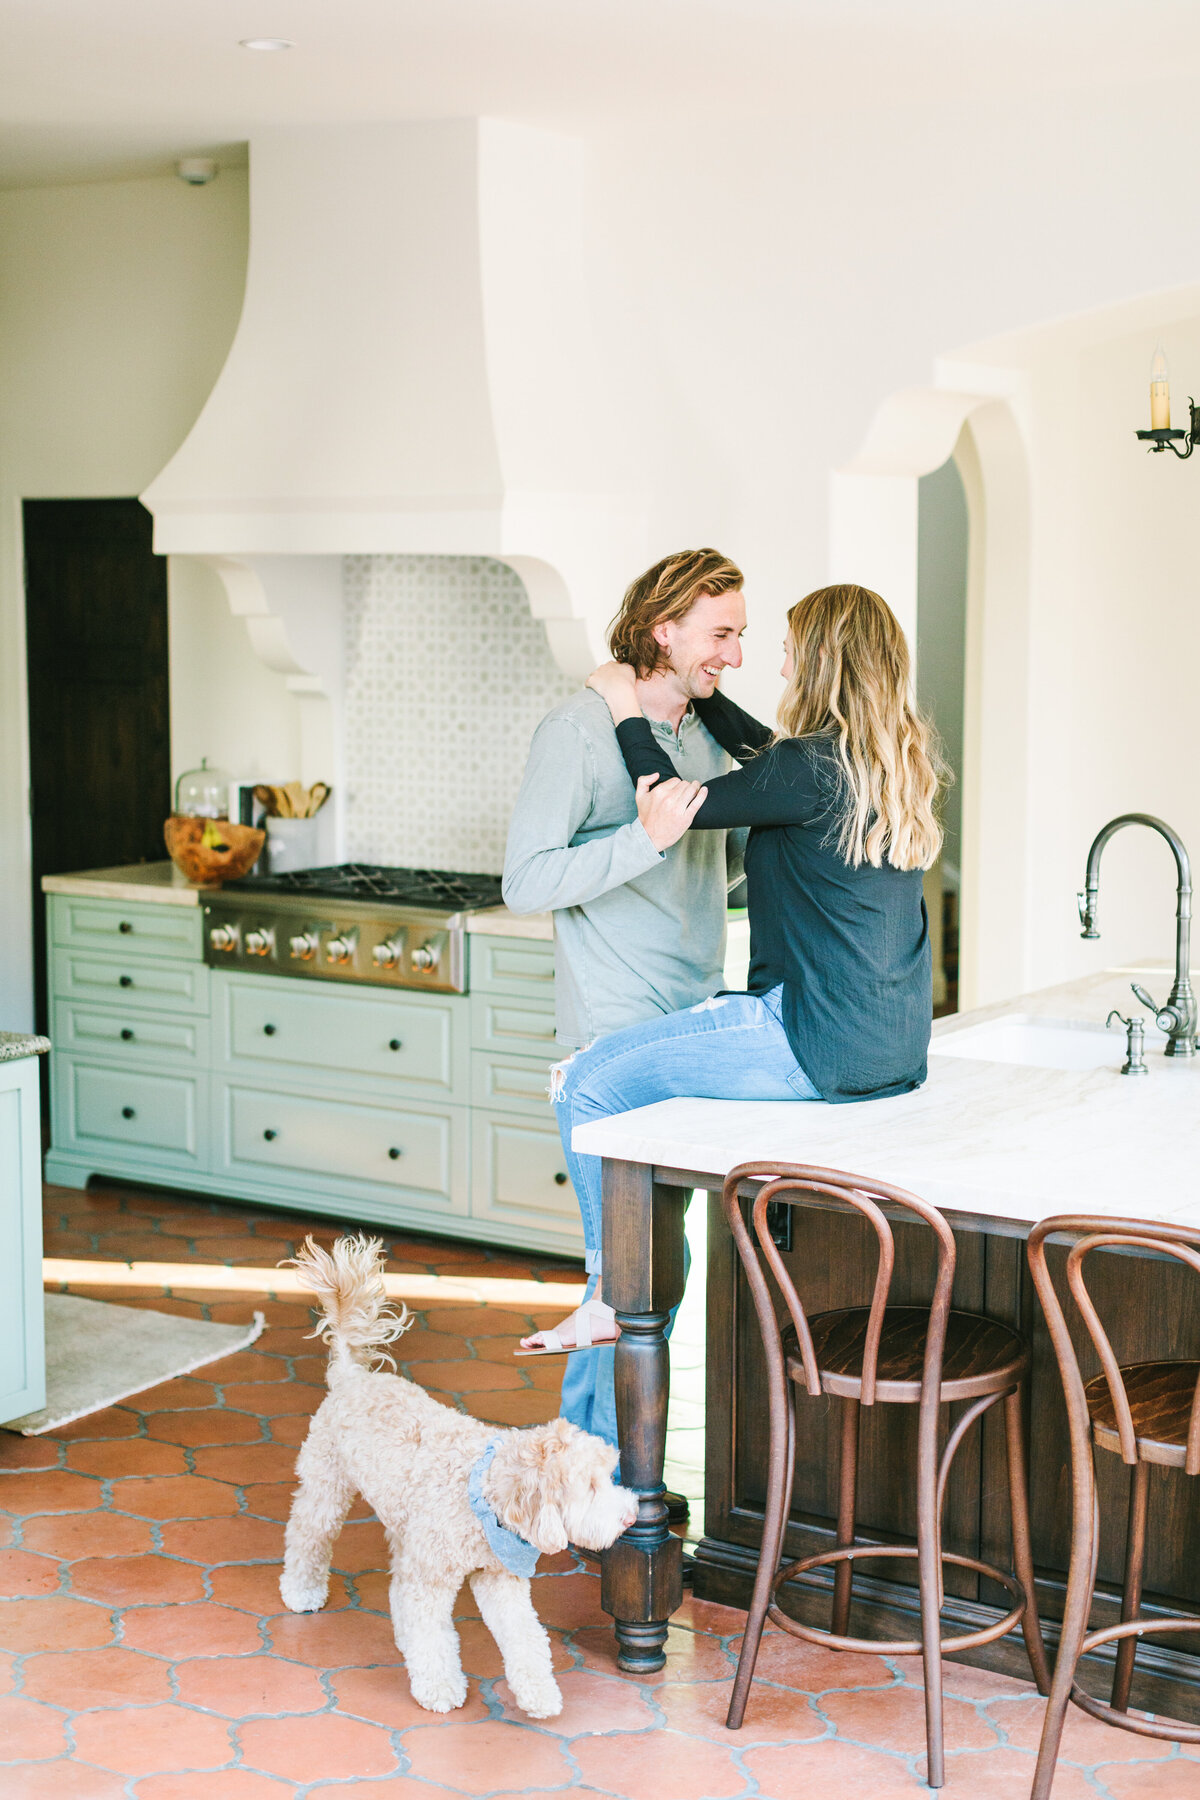 Best California and Texas Engagement Photographer-Jodee Debes Photography-75